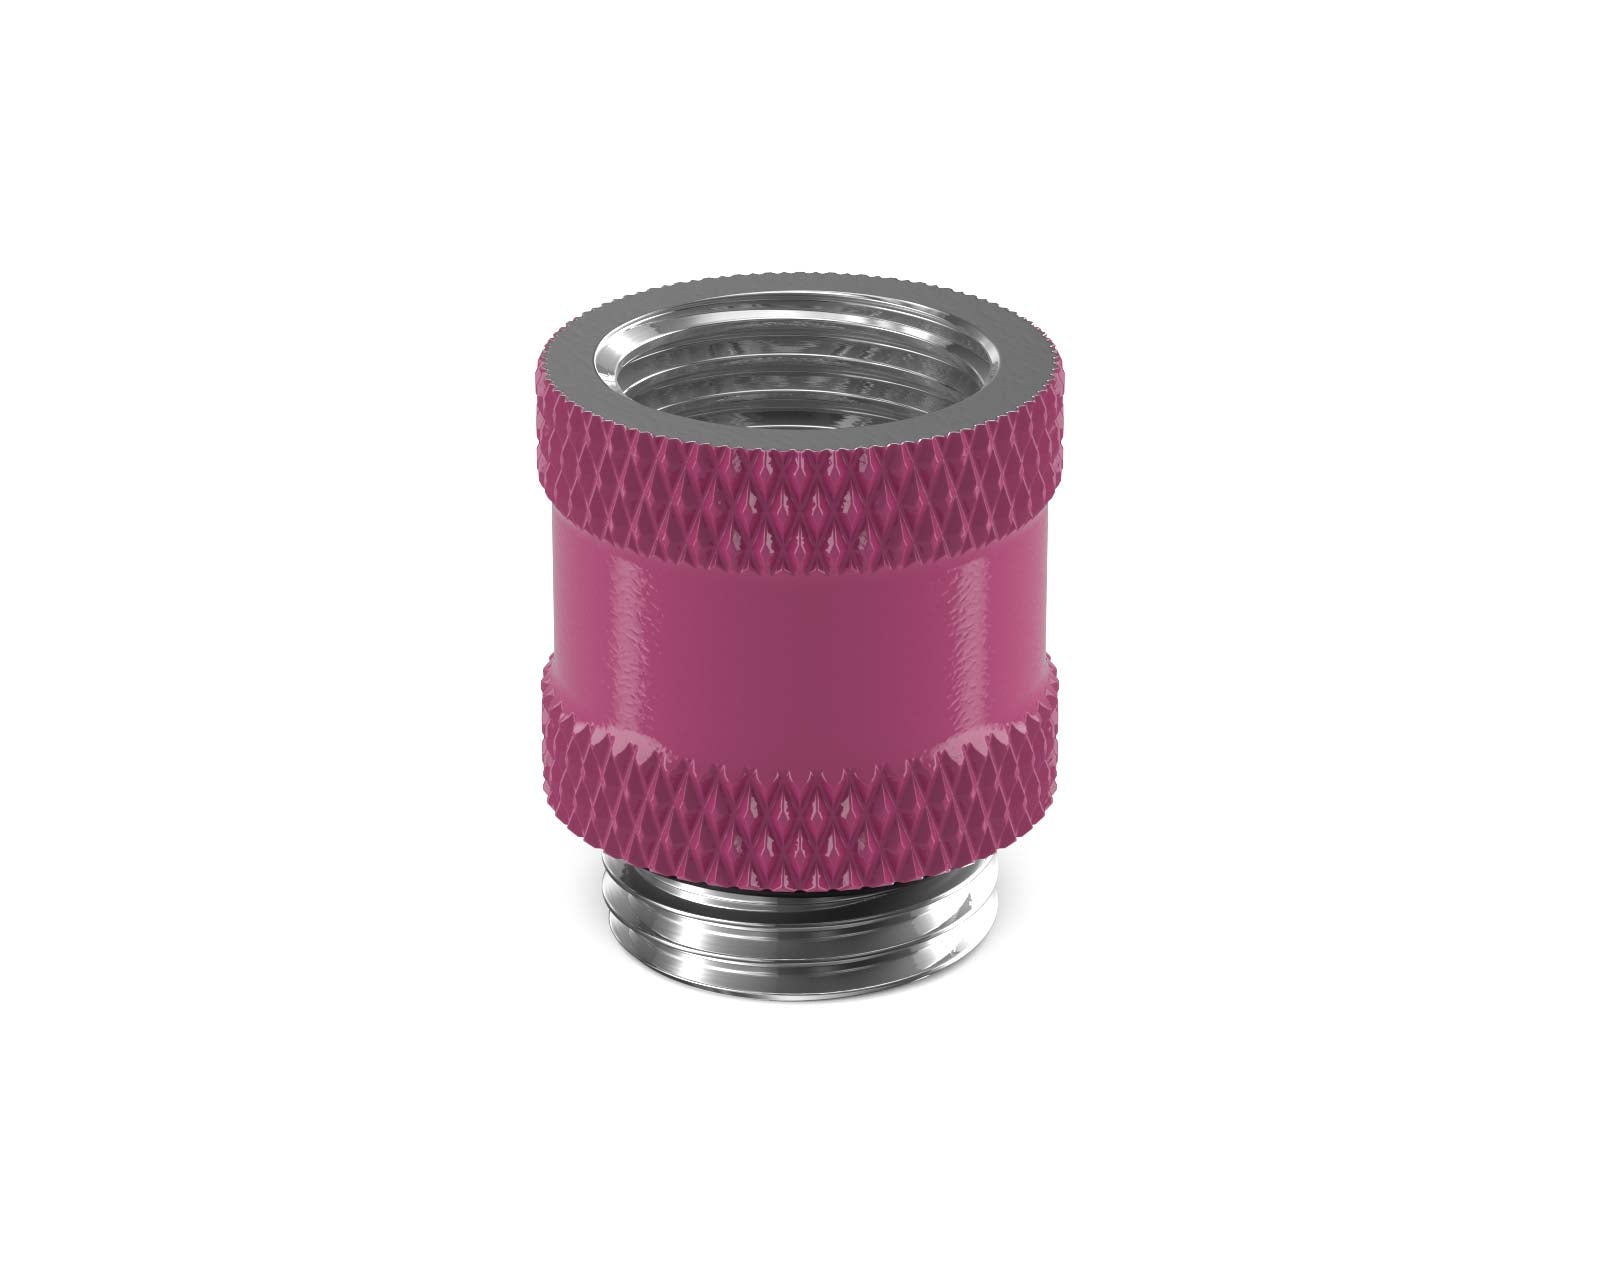 PrimoChill Male to Female G 1/4in. 15mm SX Extension Coupler - Magenta